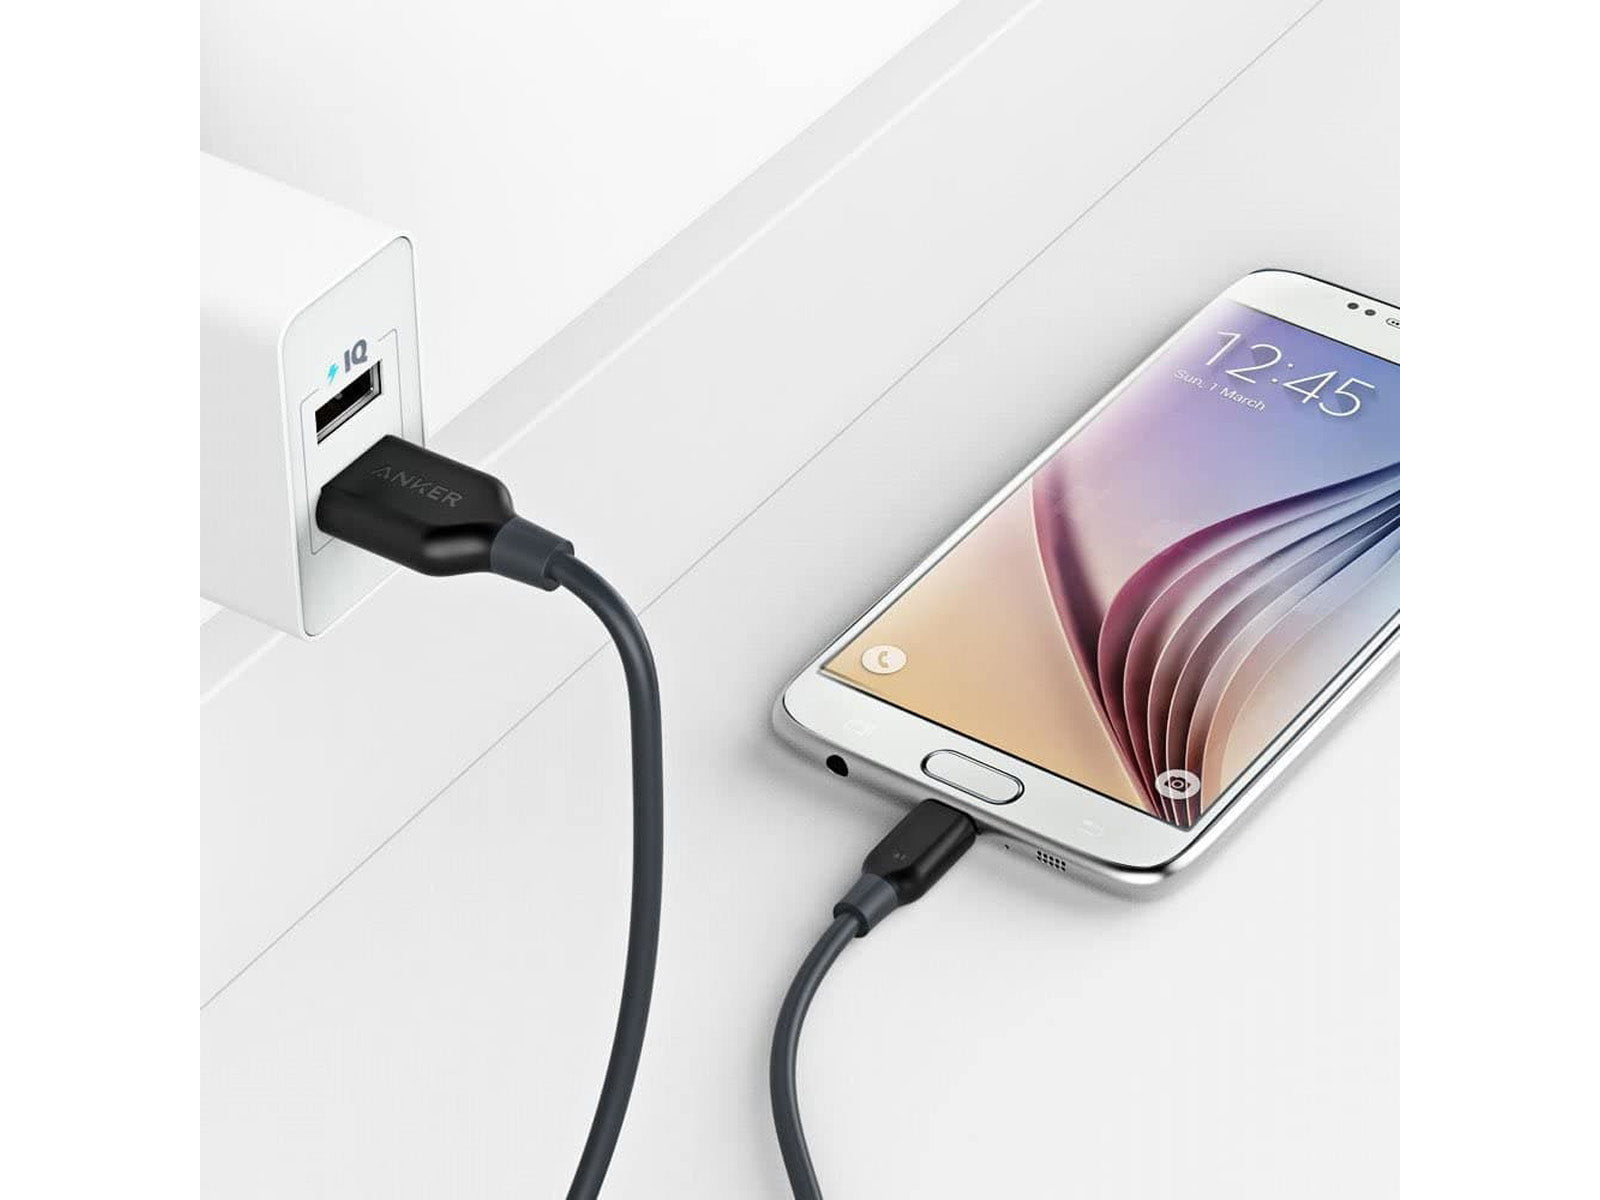 Image shows a phone charging using the PowerLine Select Micro USB High-Speed Charging Cable 